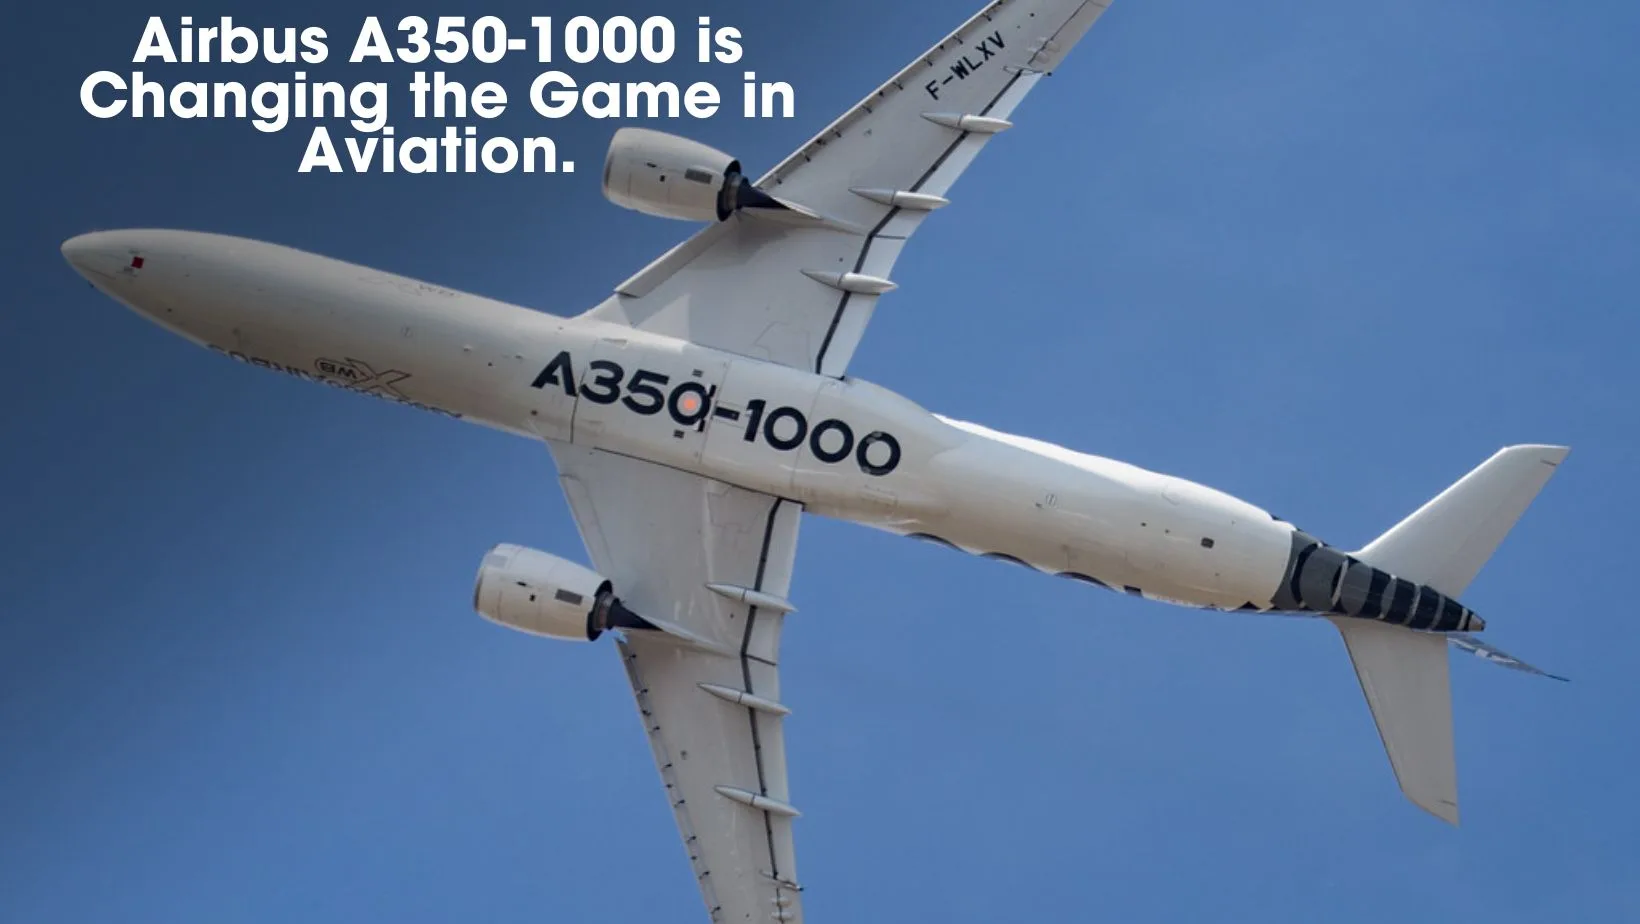 Airbus A350-1000 is Changing the Game in Aviation.